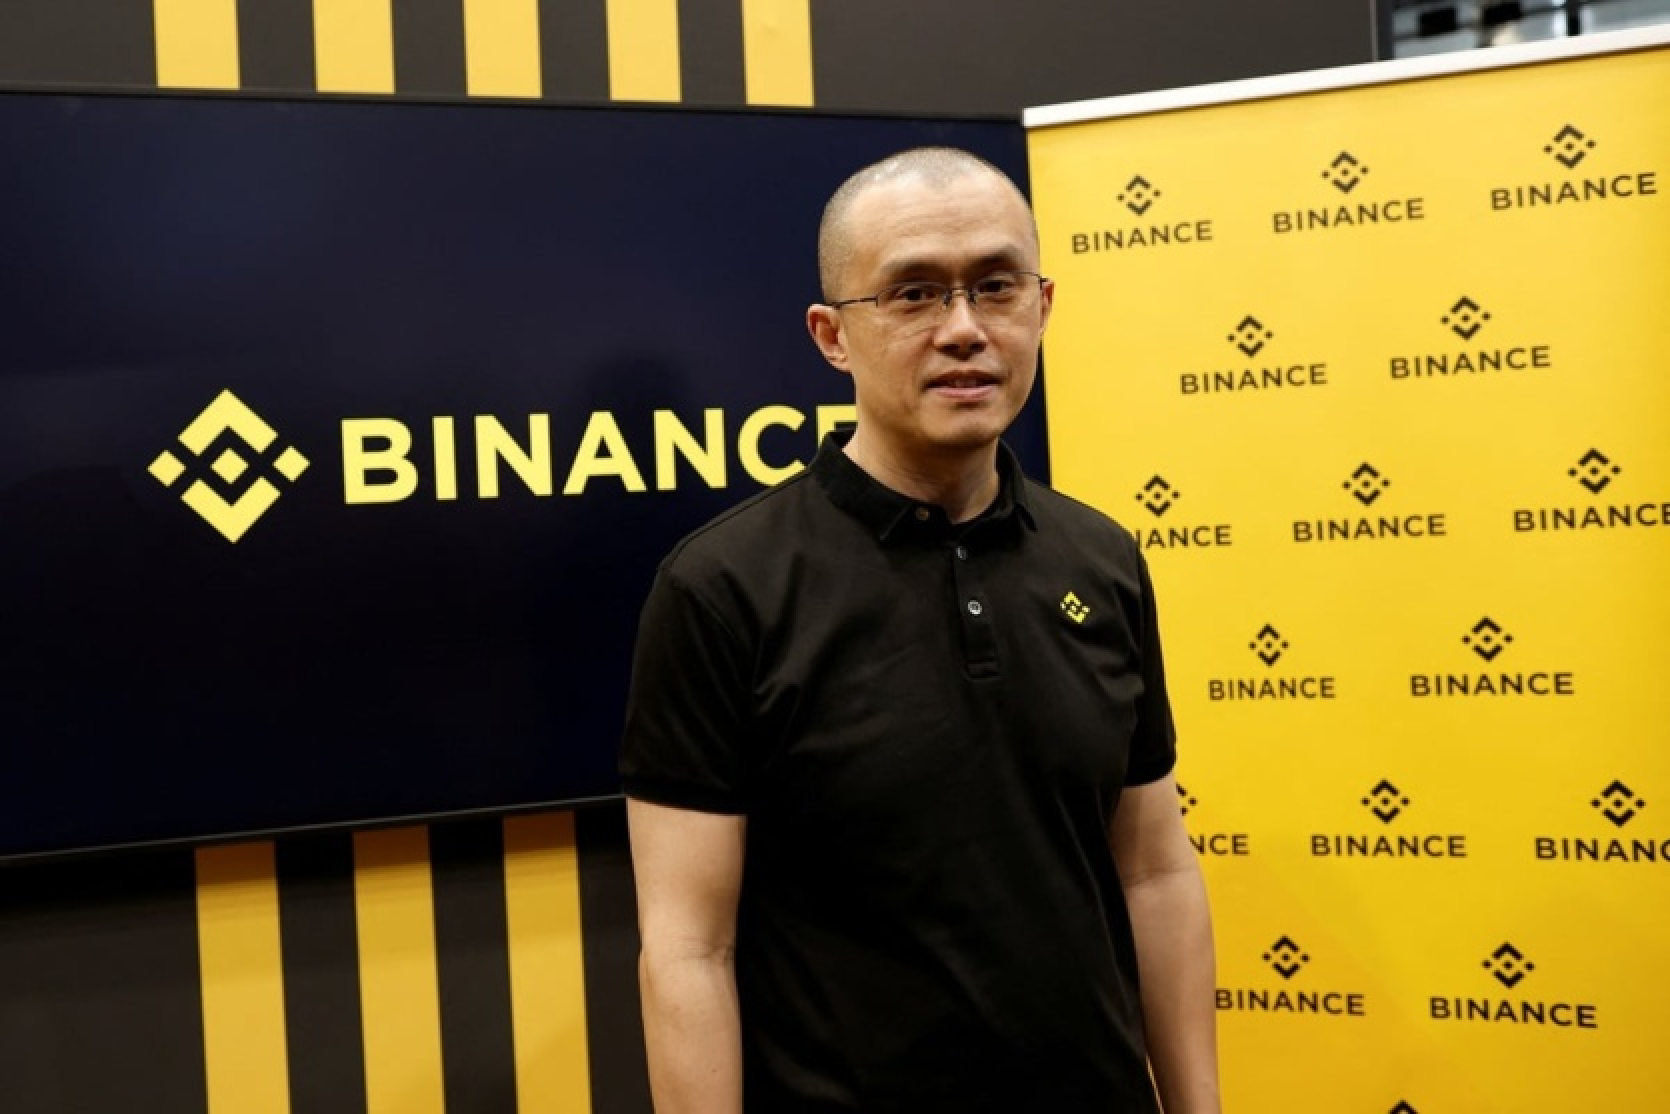 Binance to pay $4.3 billion to settle money laundering case - crypto exchange CEO Changpeng Zhao resigns